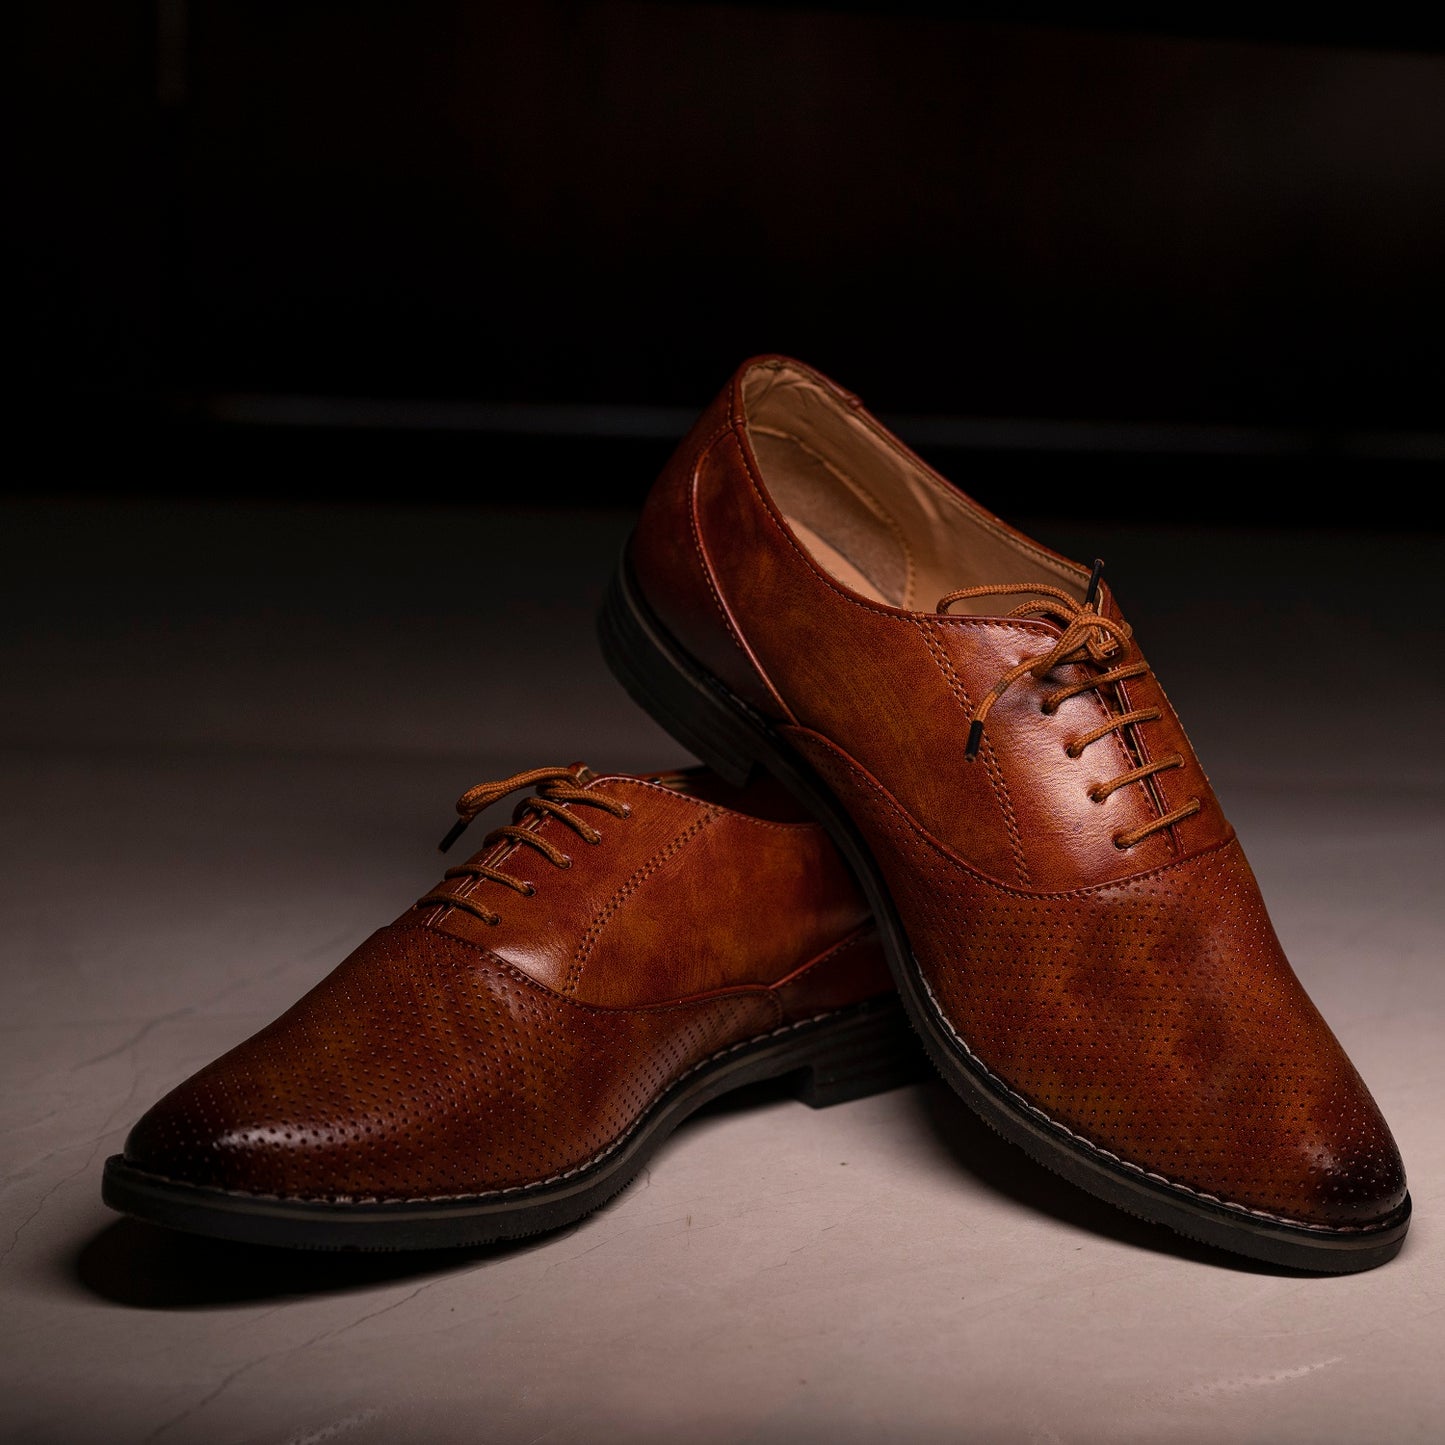 The Aurous Socrates Oxford Formal Laceup Derby Shoes With Dotted Texture